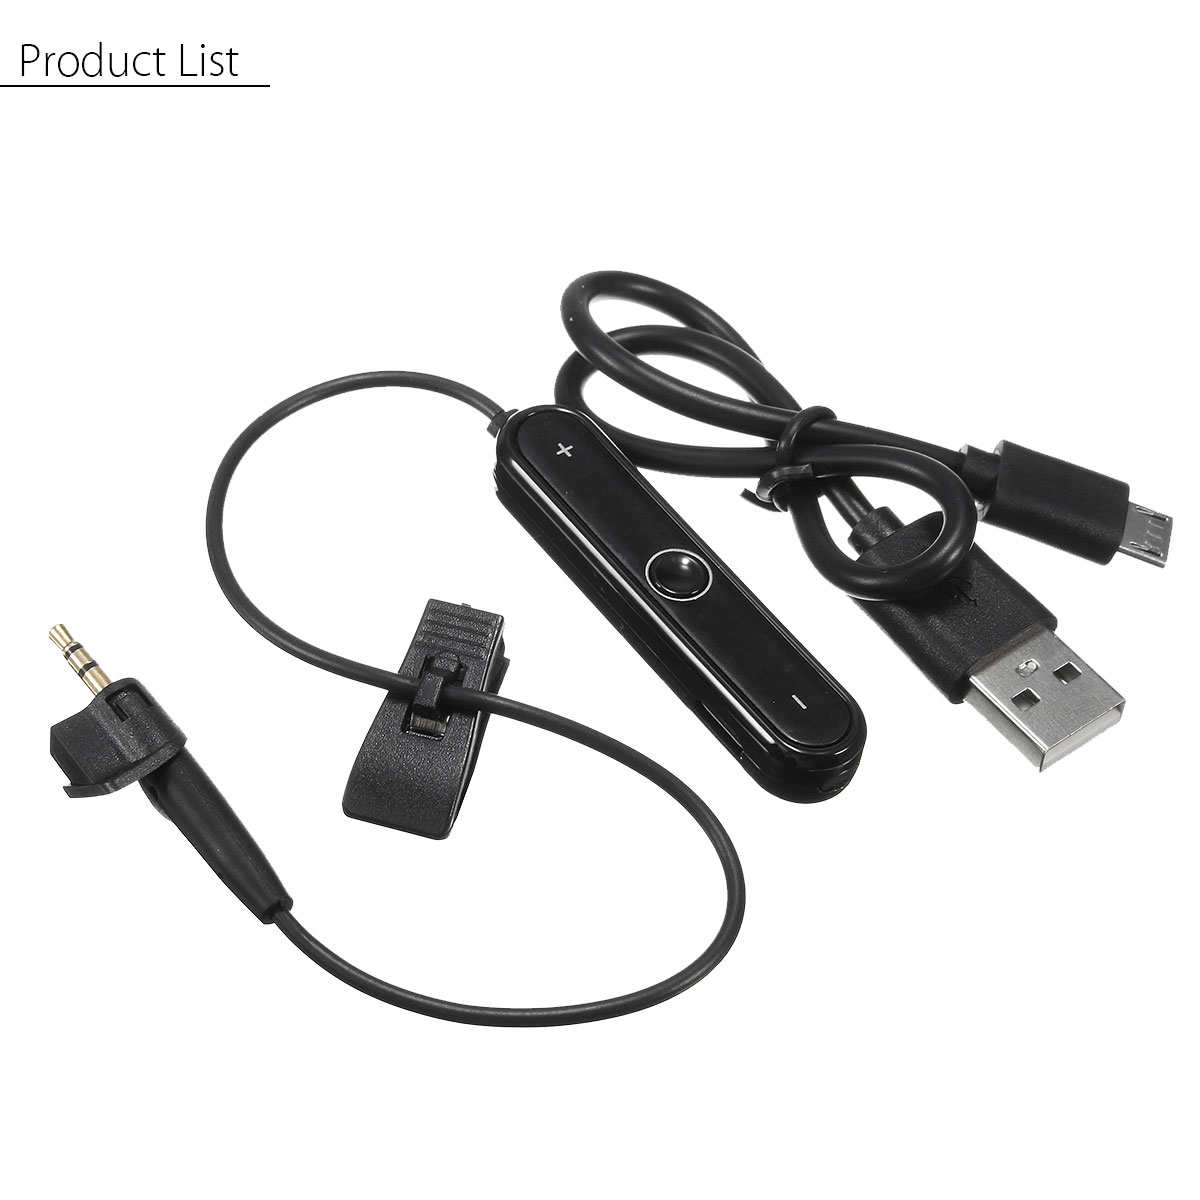 Wired-Control-Wireless-bluetooth-Cable-Converter-Receiver-For-Bose-AE2-AE2i-AE2w-1139328-6